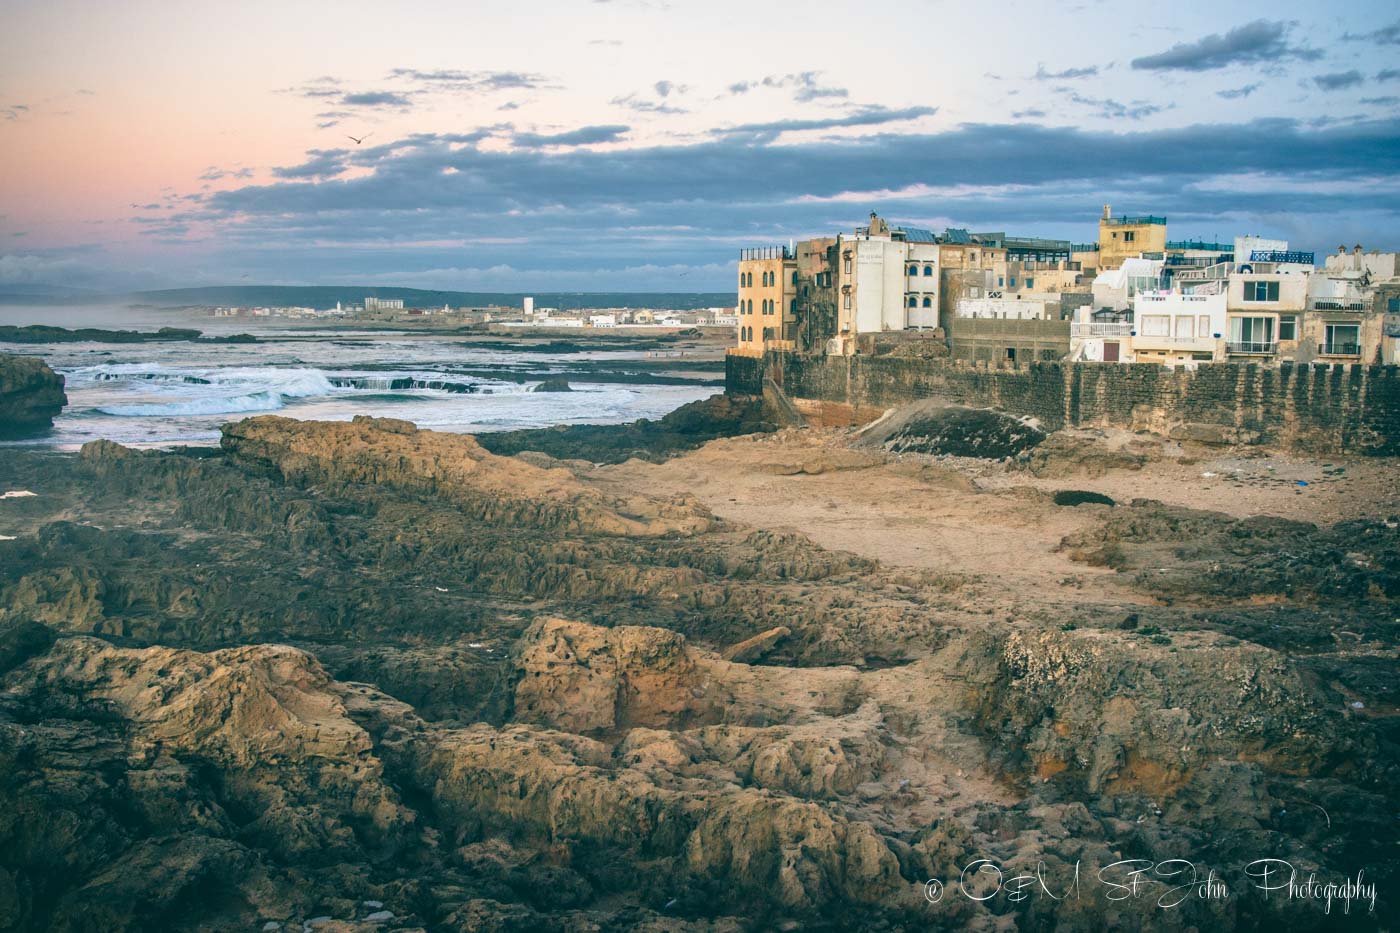 Medieval City of Essaouira - More Than Just Another Game of Thrones Location